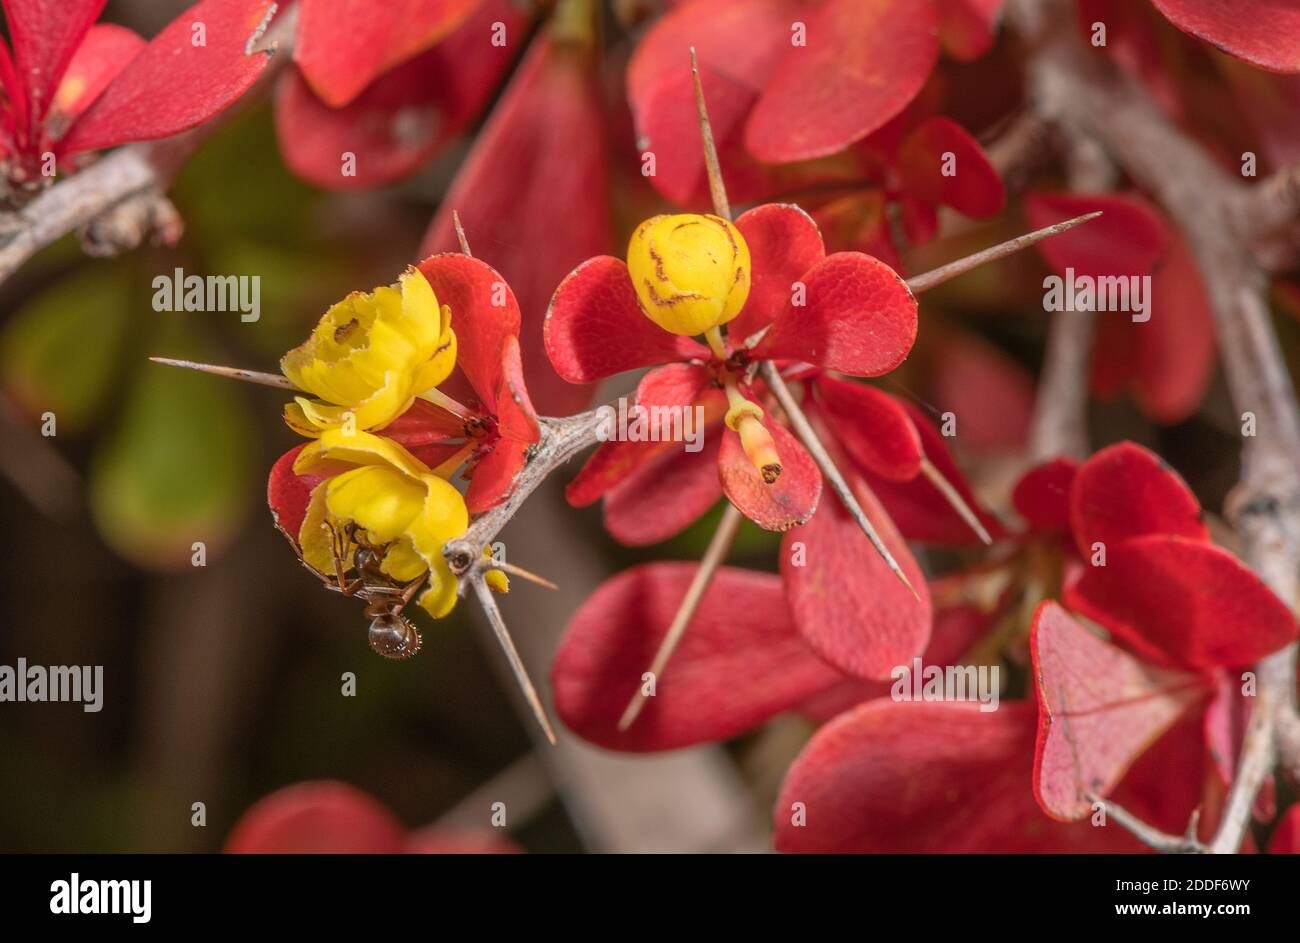 Flowers and autumnal leaves of Japanese barberry, Berberis thunbergii, with ant pollinators. Dorset. Stock Photo